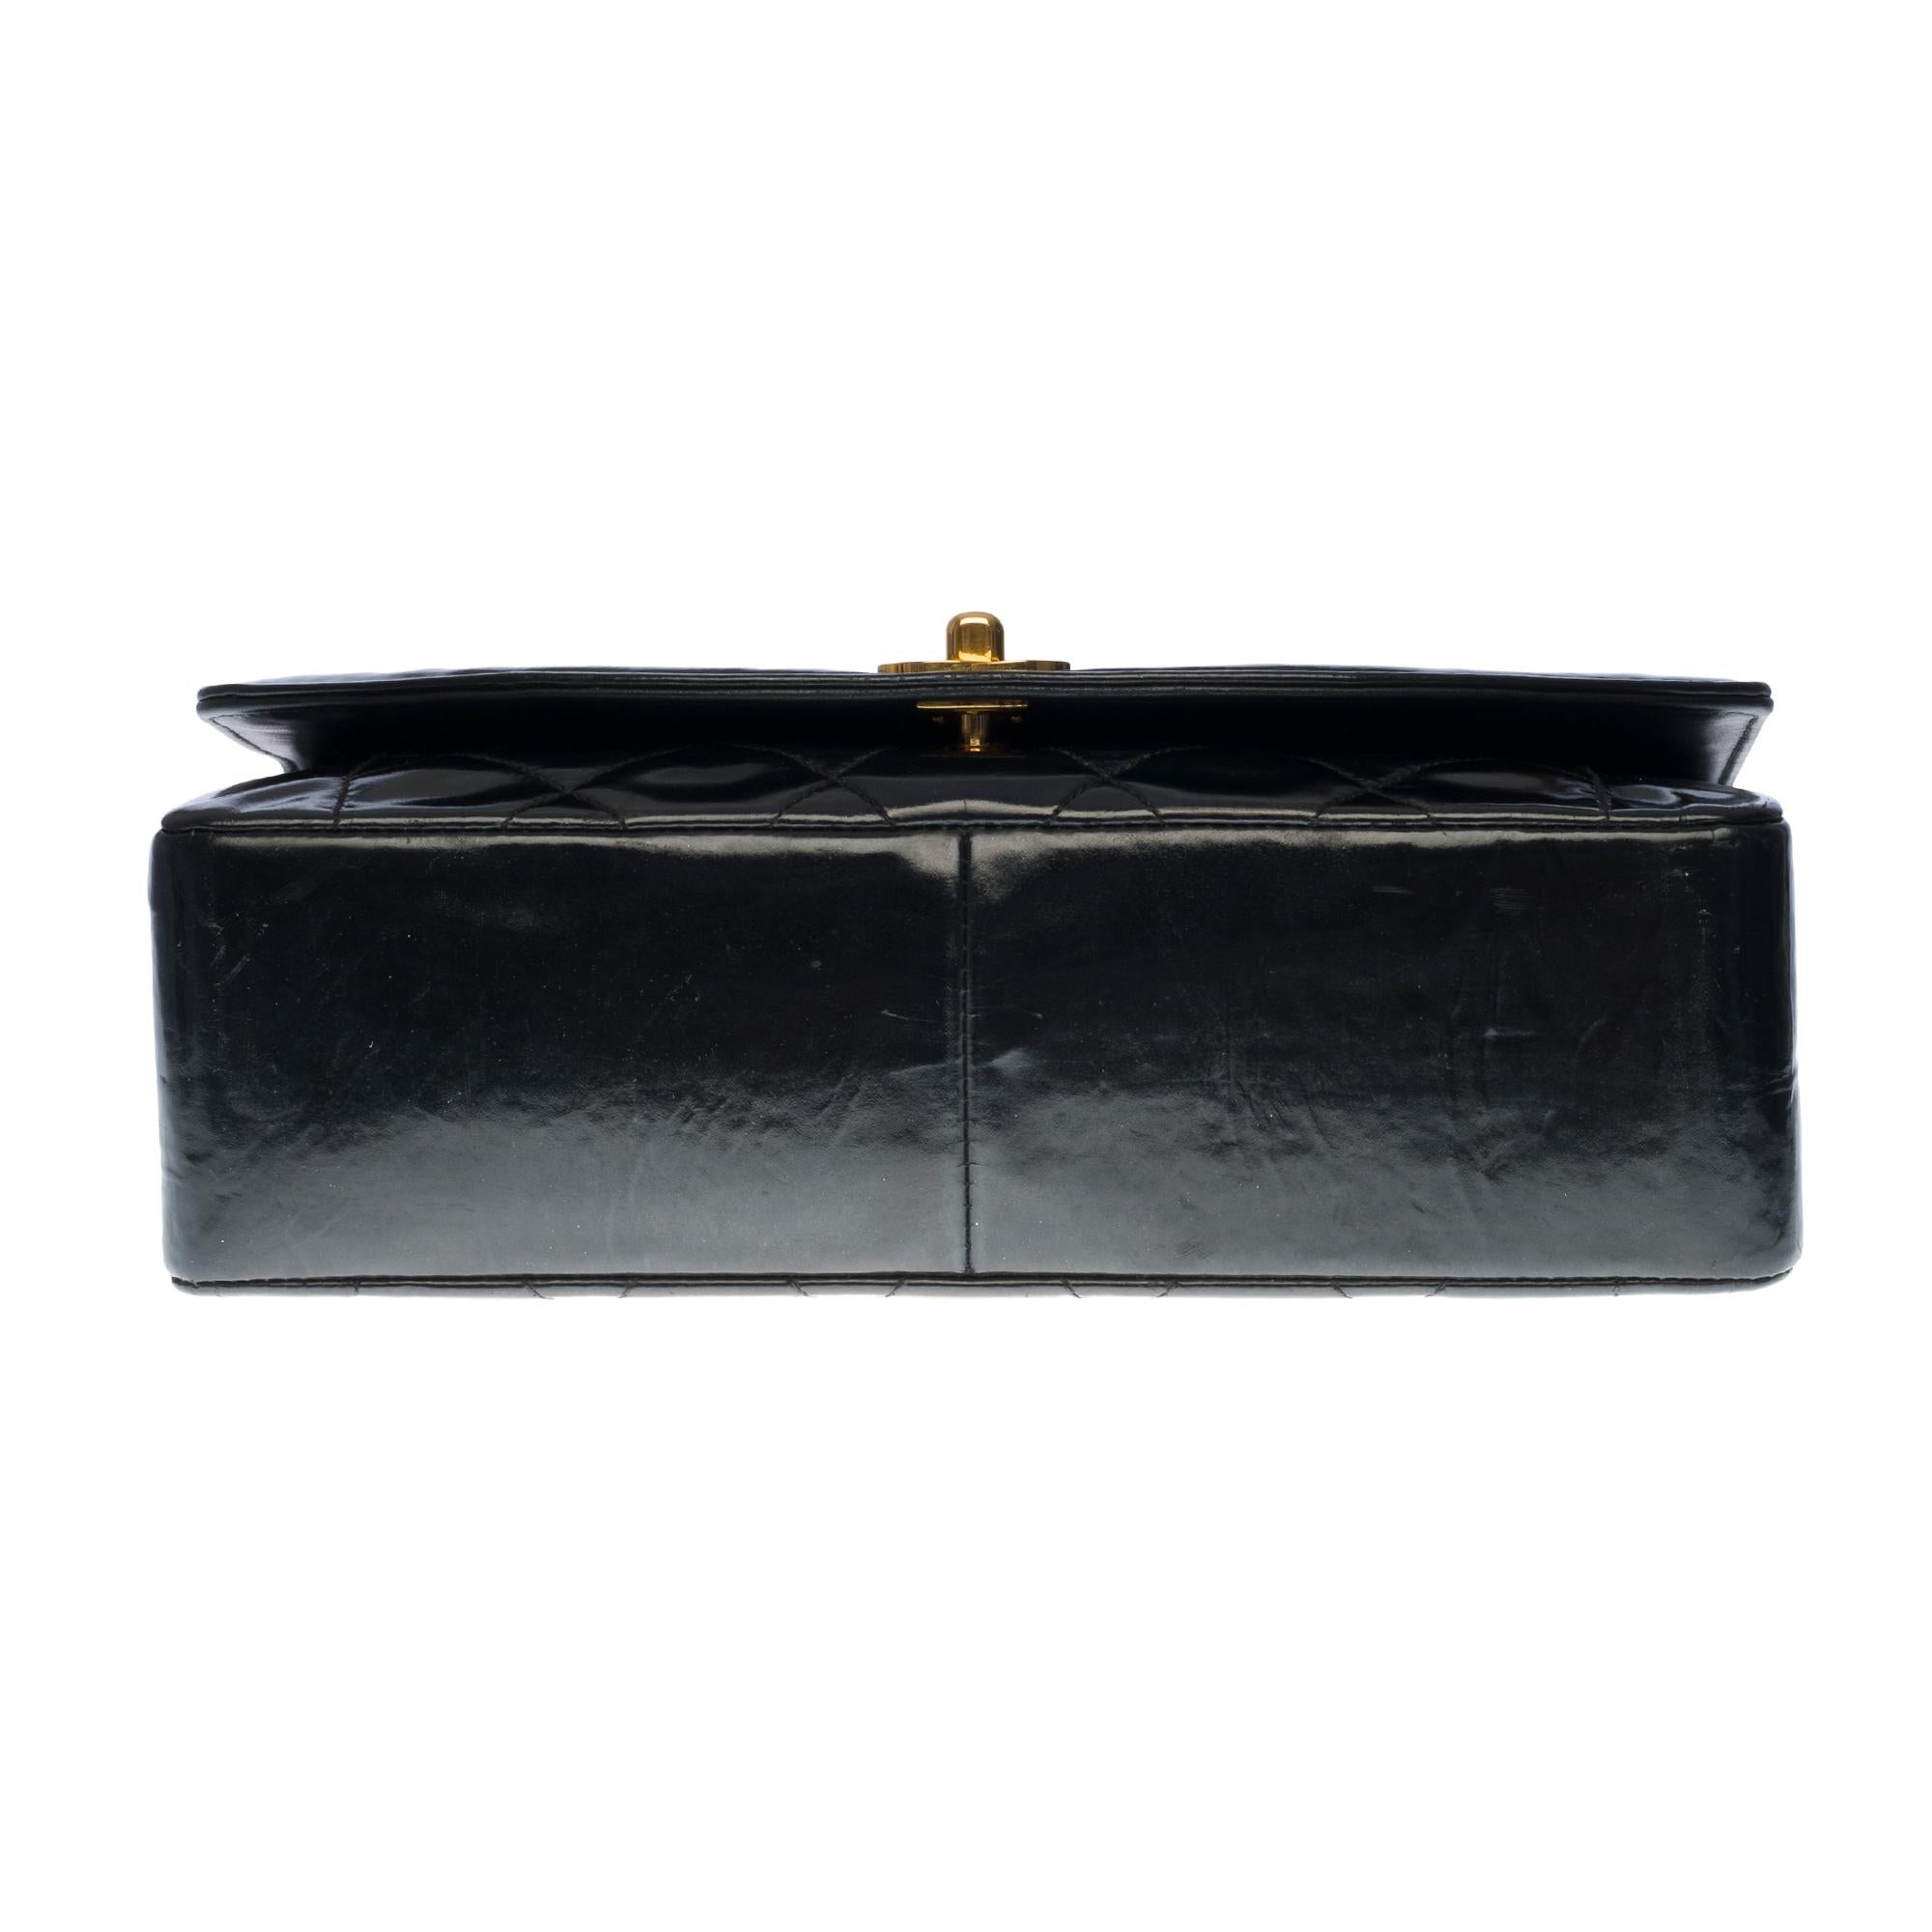 Stunning Chanel Diana Shoulder bag in black quilted patent leather and GHW 5